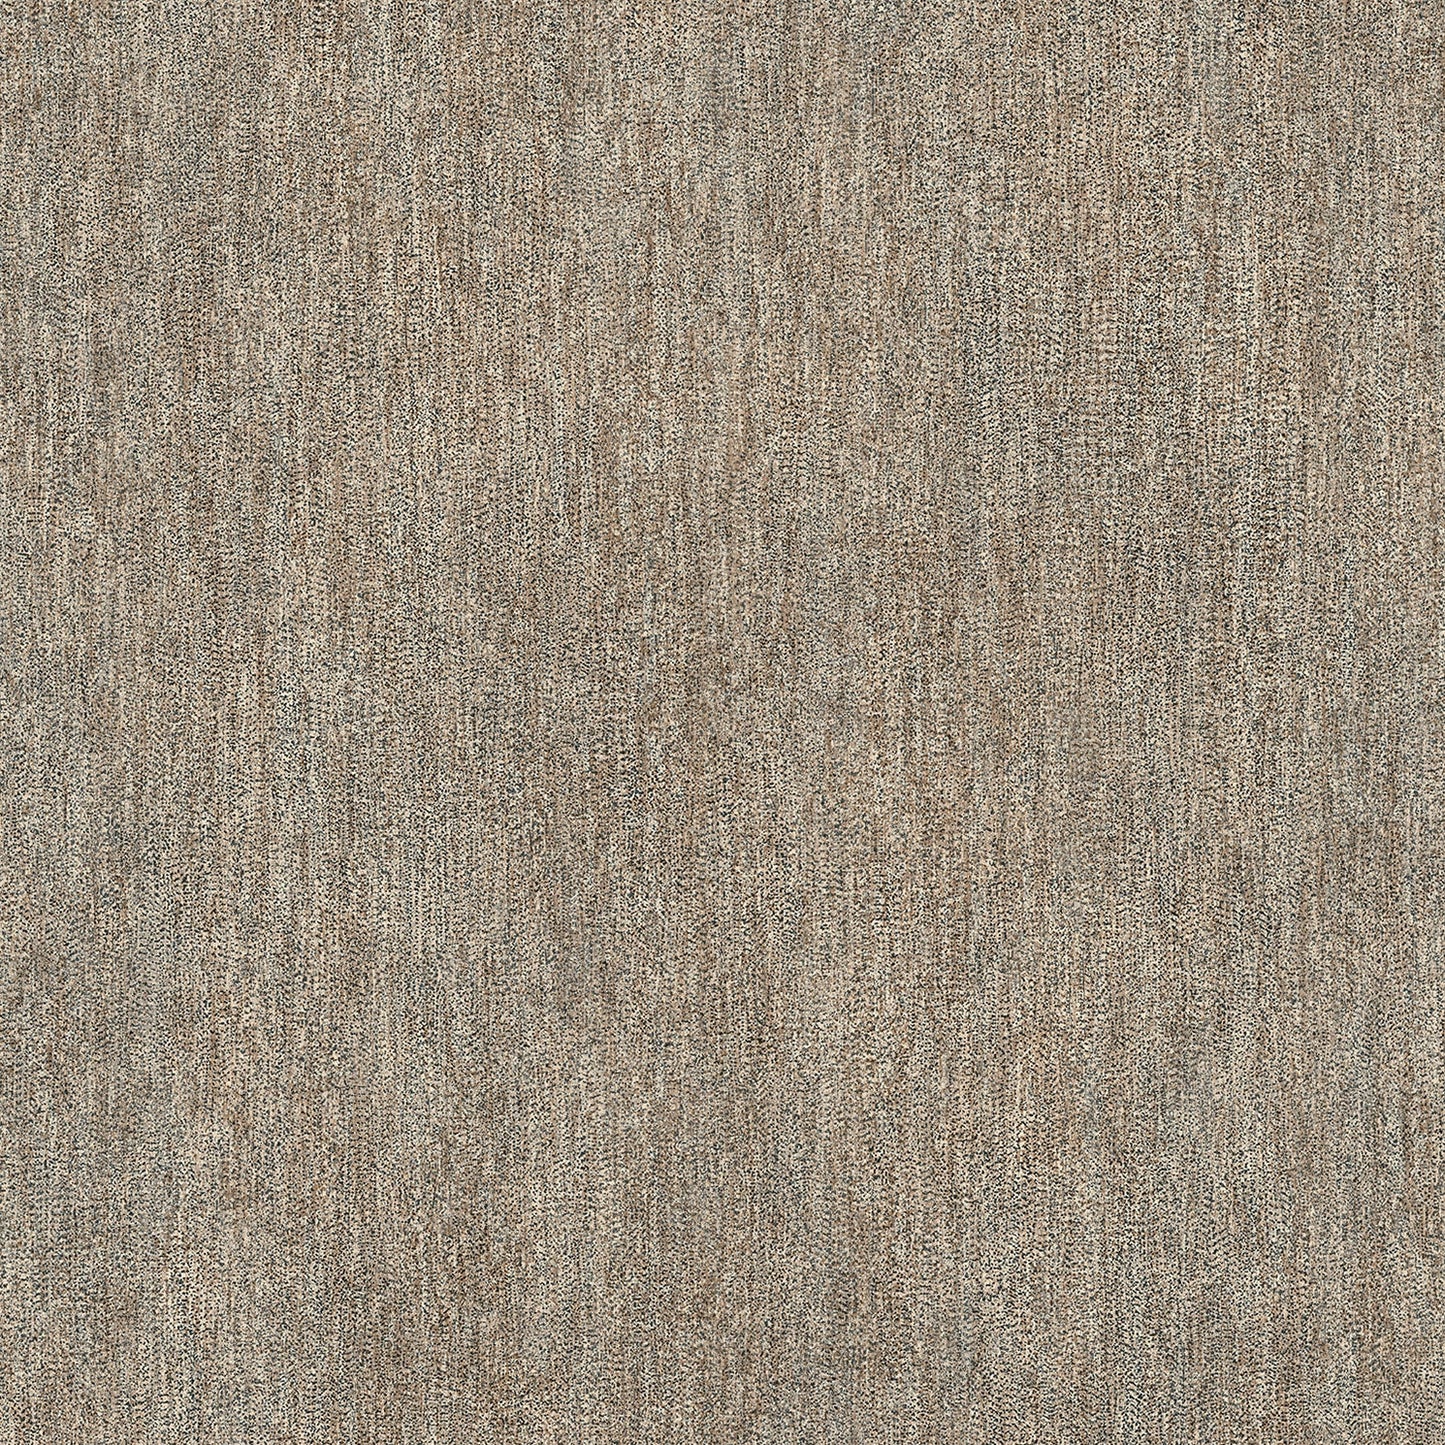 Find 4020-09108 Geo & Textures Arlo Wheat Speckle Wheat by Advantage